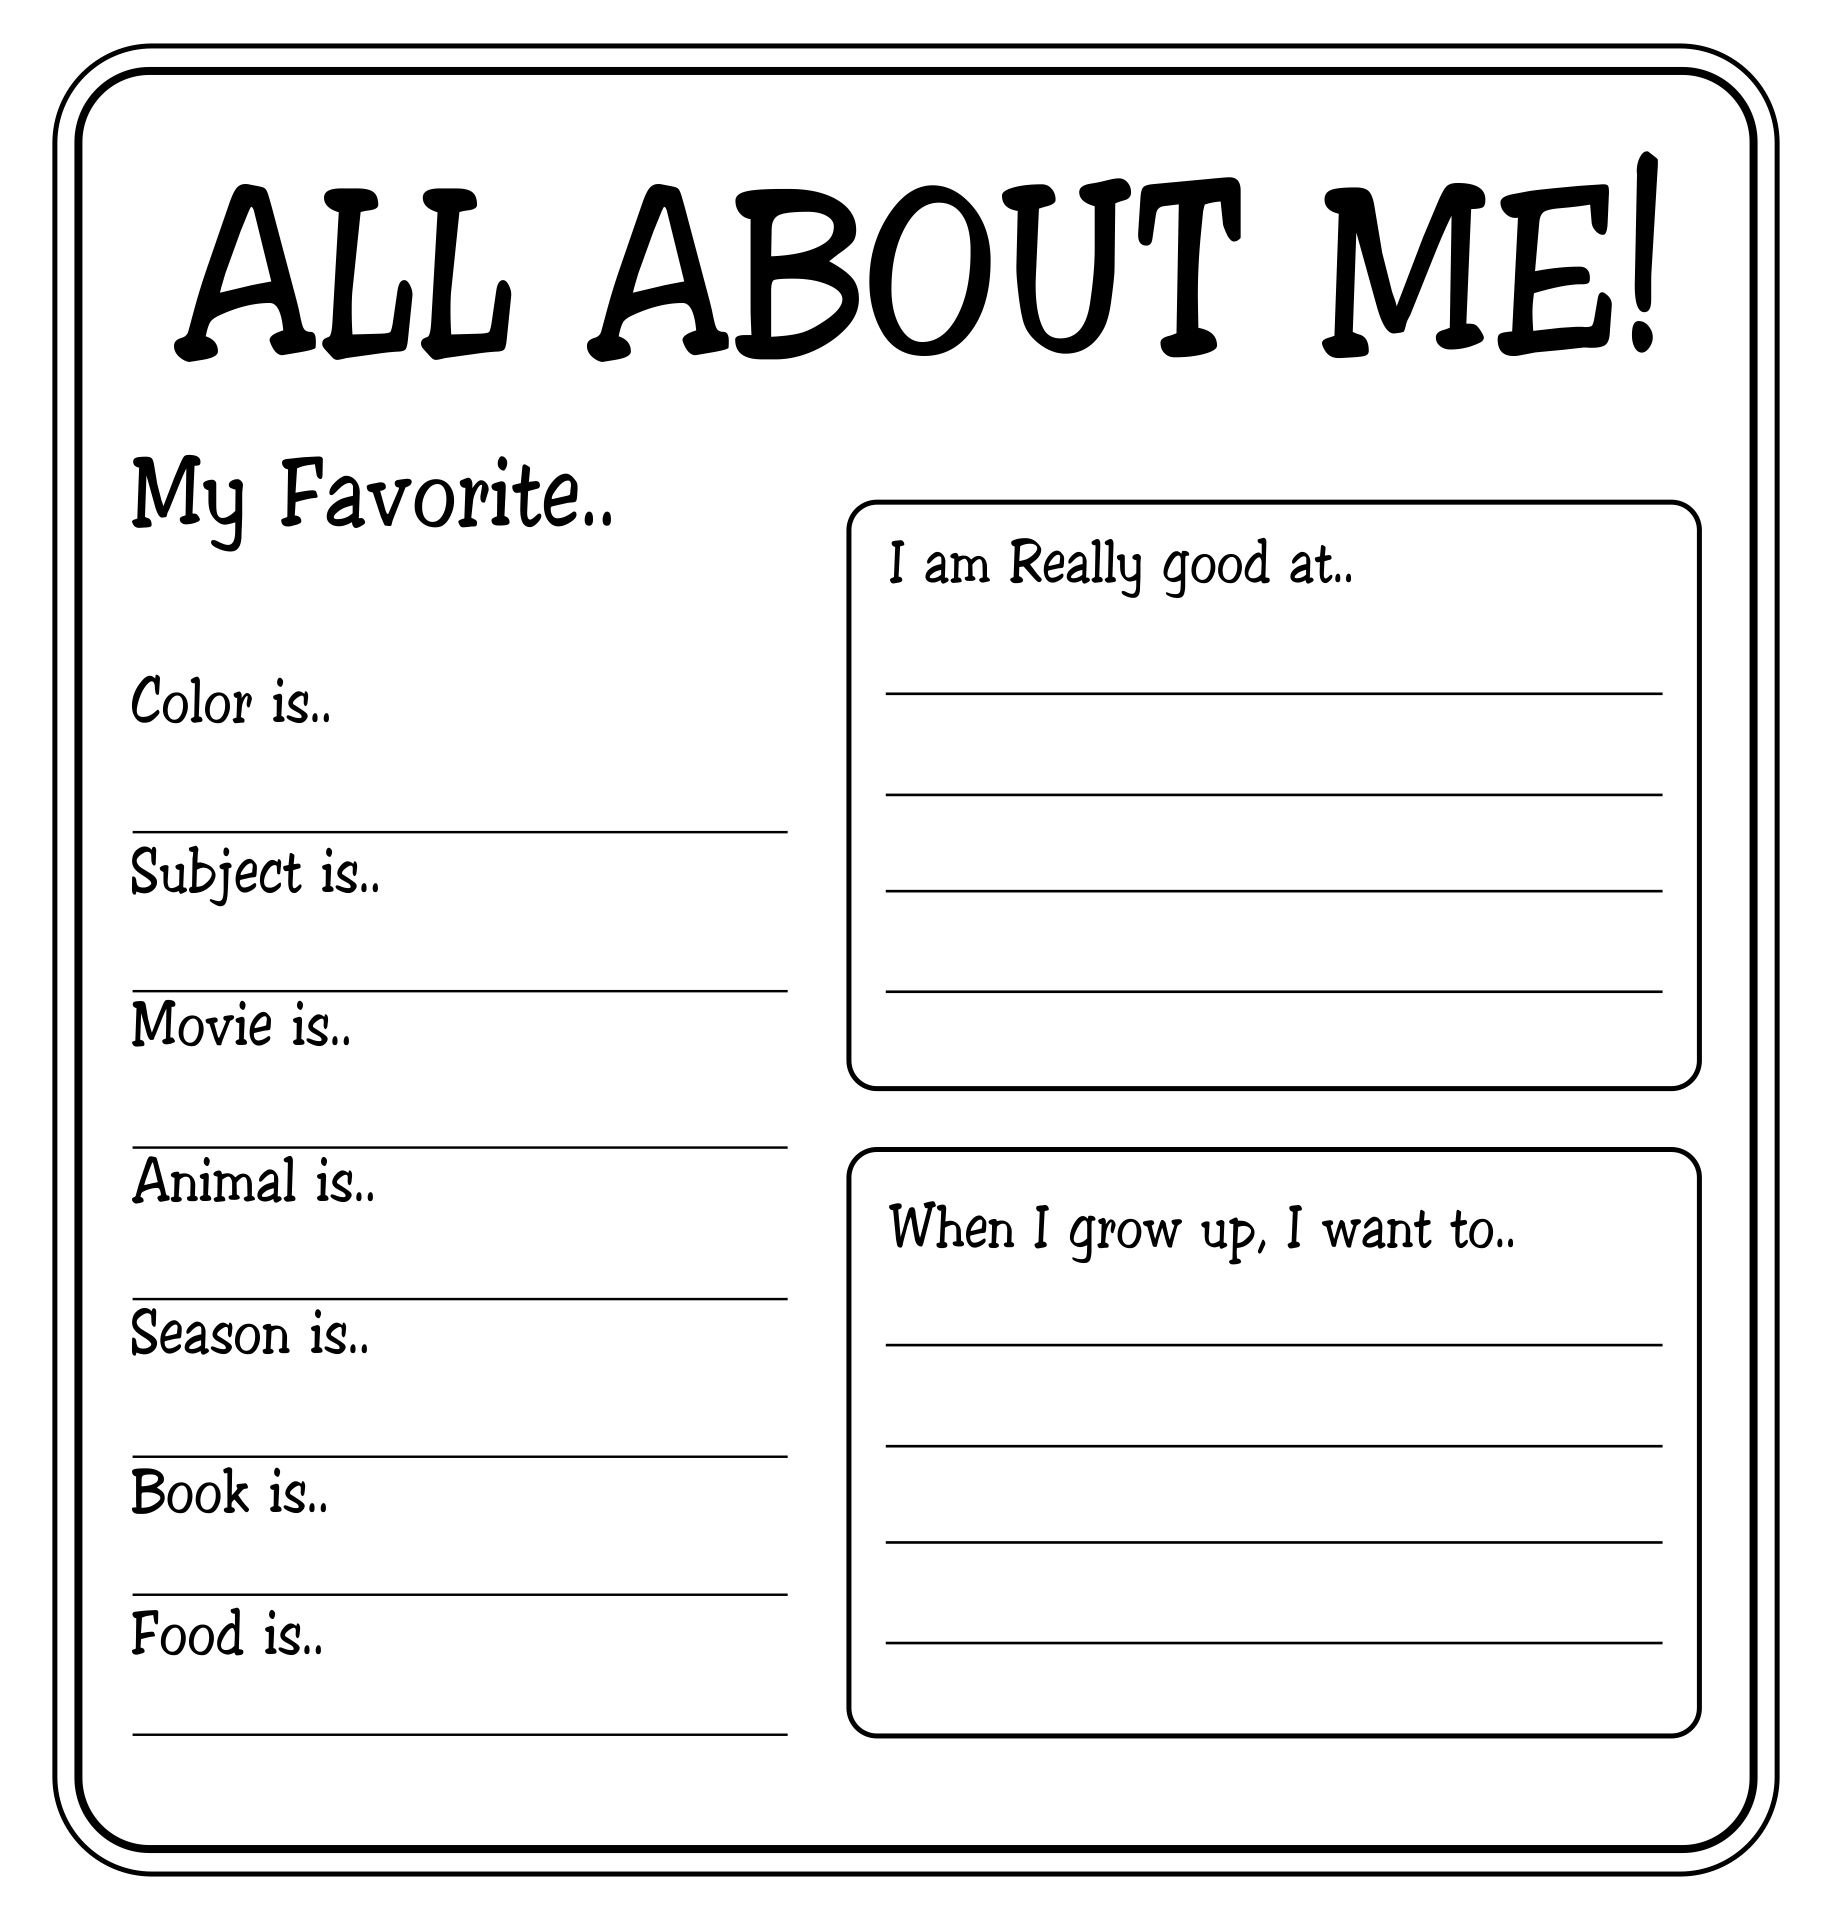 all-about-me-middle-school-free-printable-all-about-me-worksheets